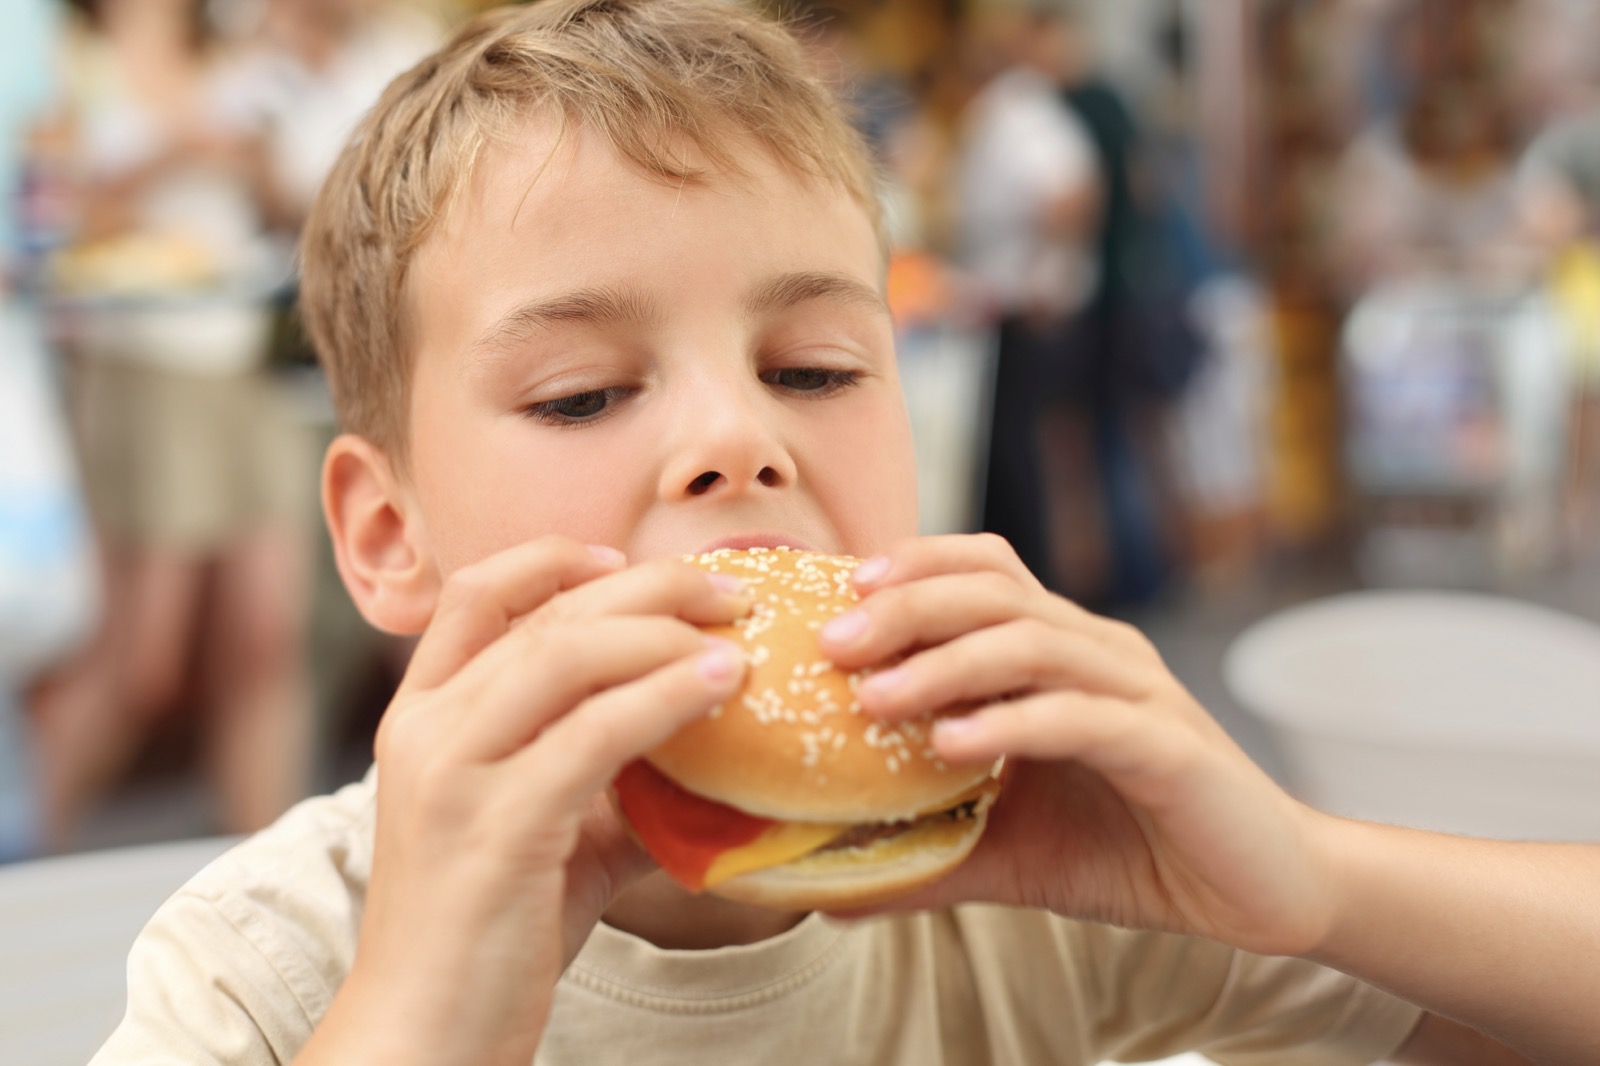 Happiness Trivia Questions And Answers Quiz Child eating burger fast food